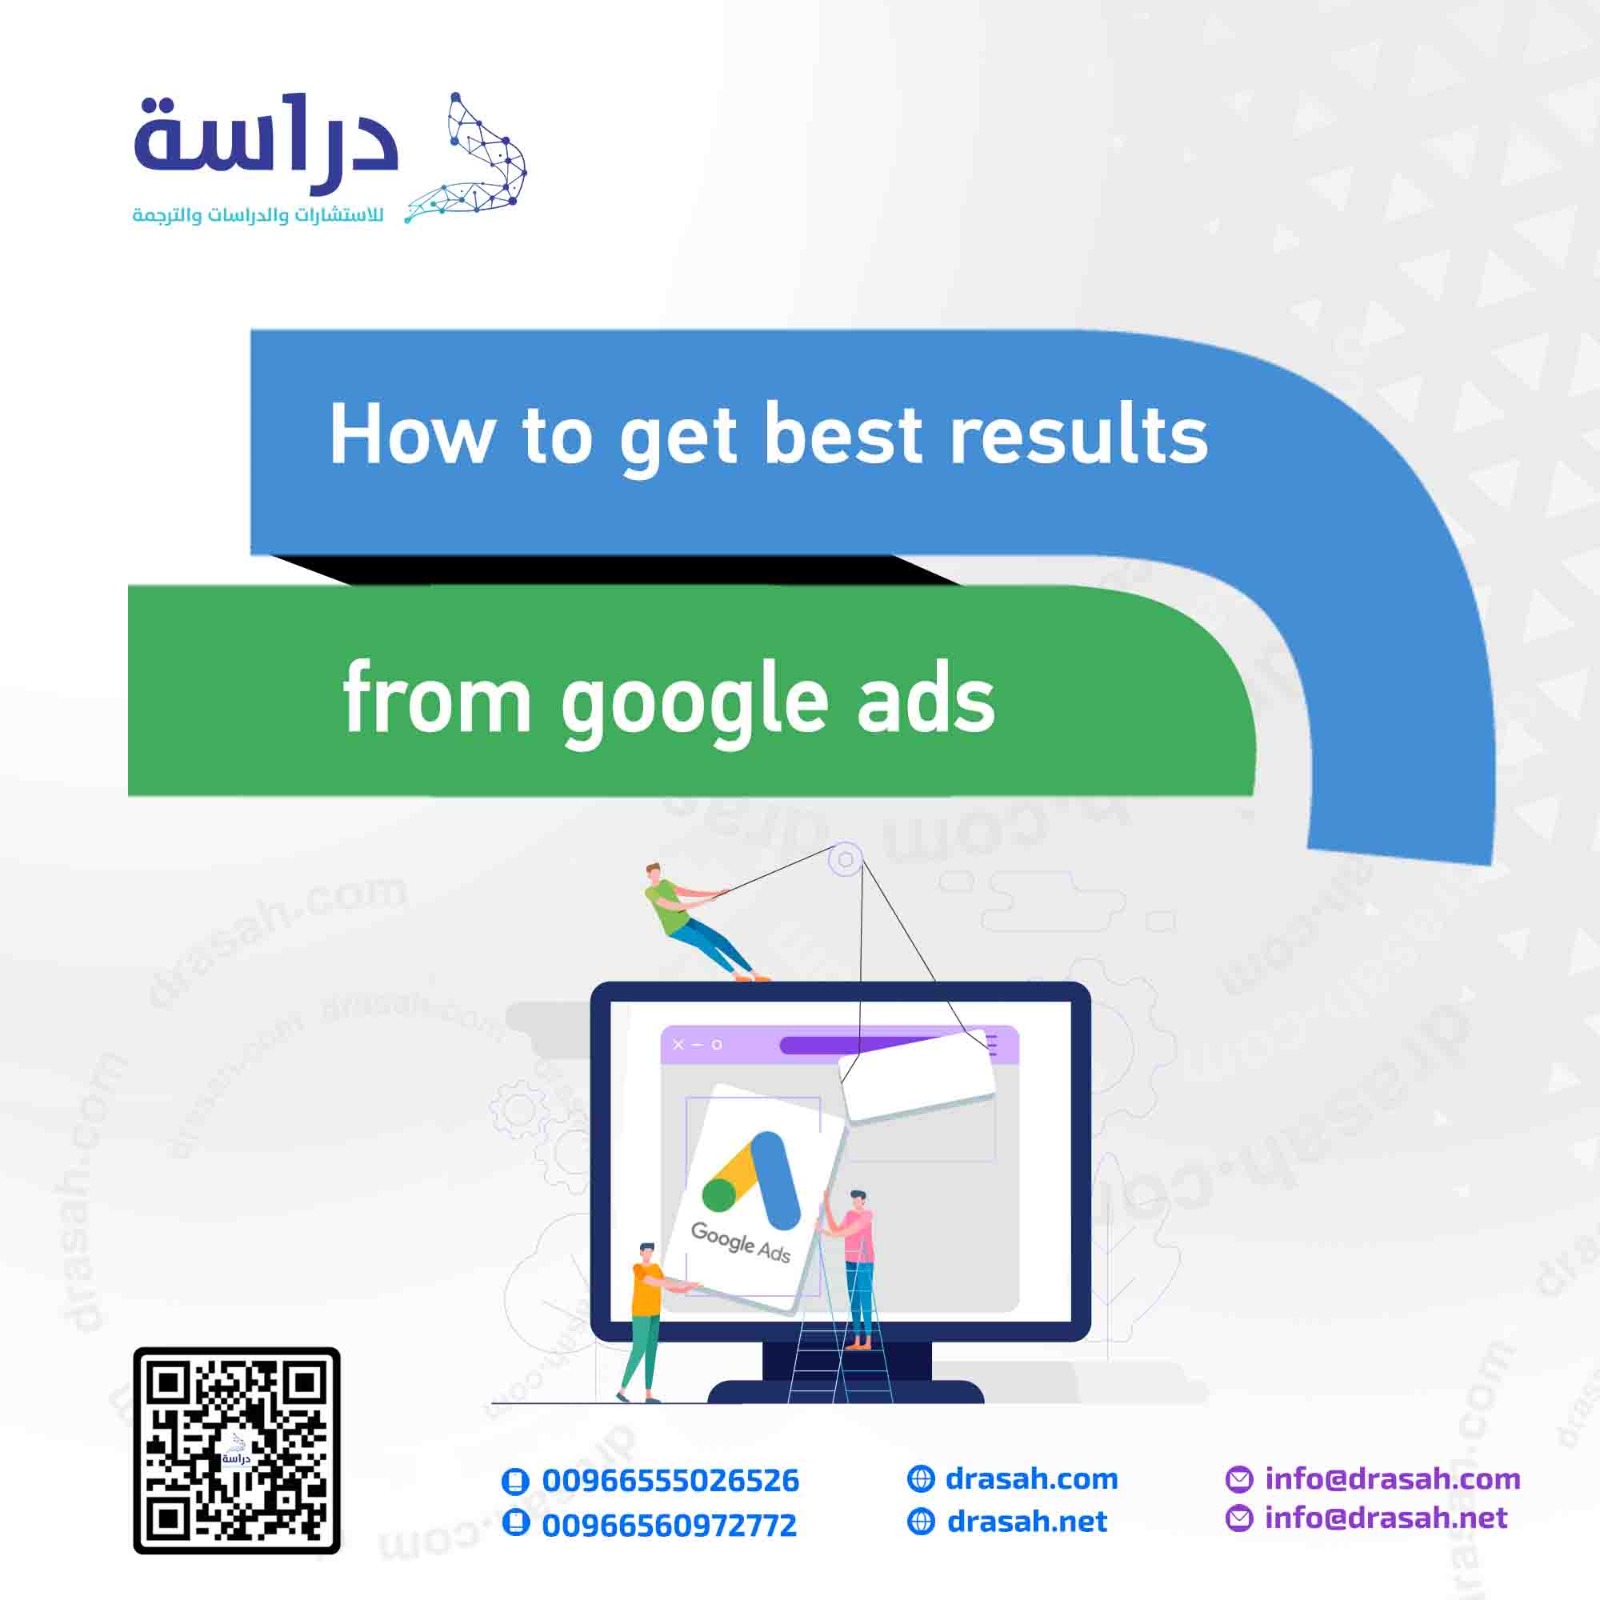 How to get best results from google ads